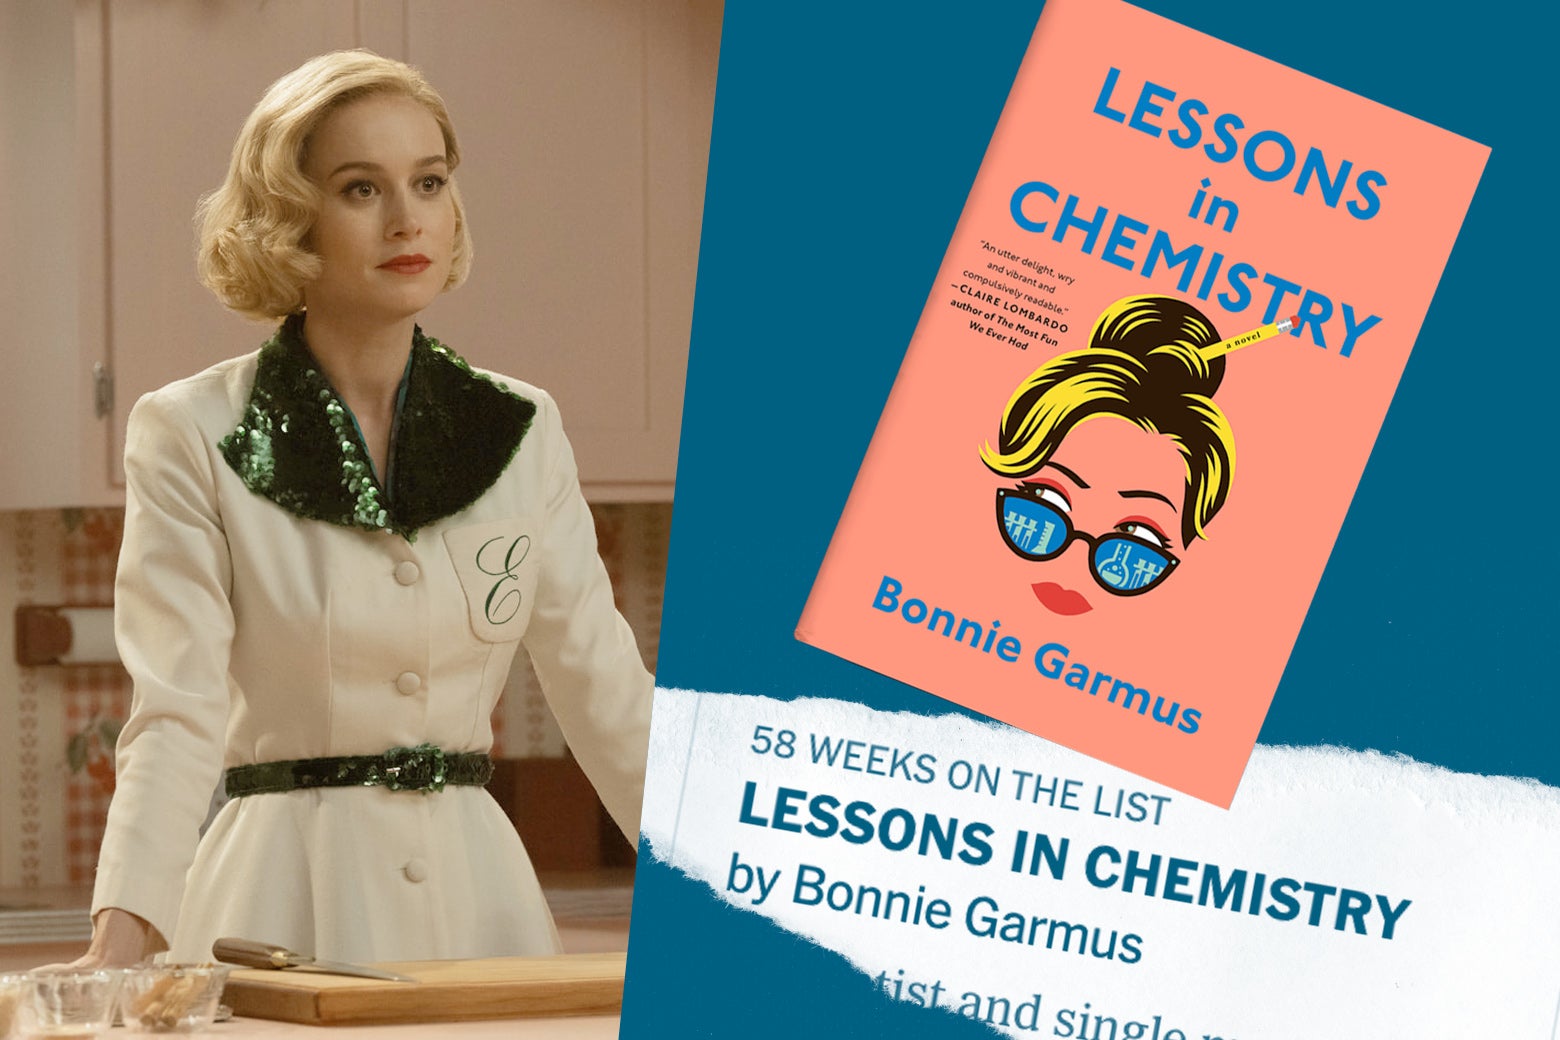 A blond woman wears a chef's coat with green sequins and stands in a television kitchen set. A cutting board and knife sit on the counter in front of her. On the other side of the illo is the cover of Lessons in Chemistry, along with a newspaper clipping that reads, "58 Weeks on the List."